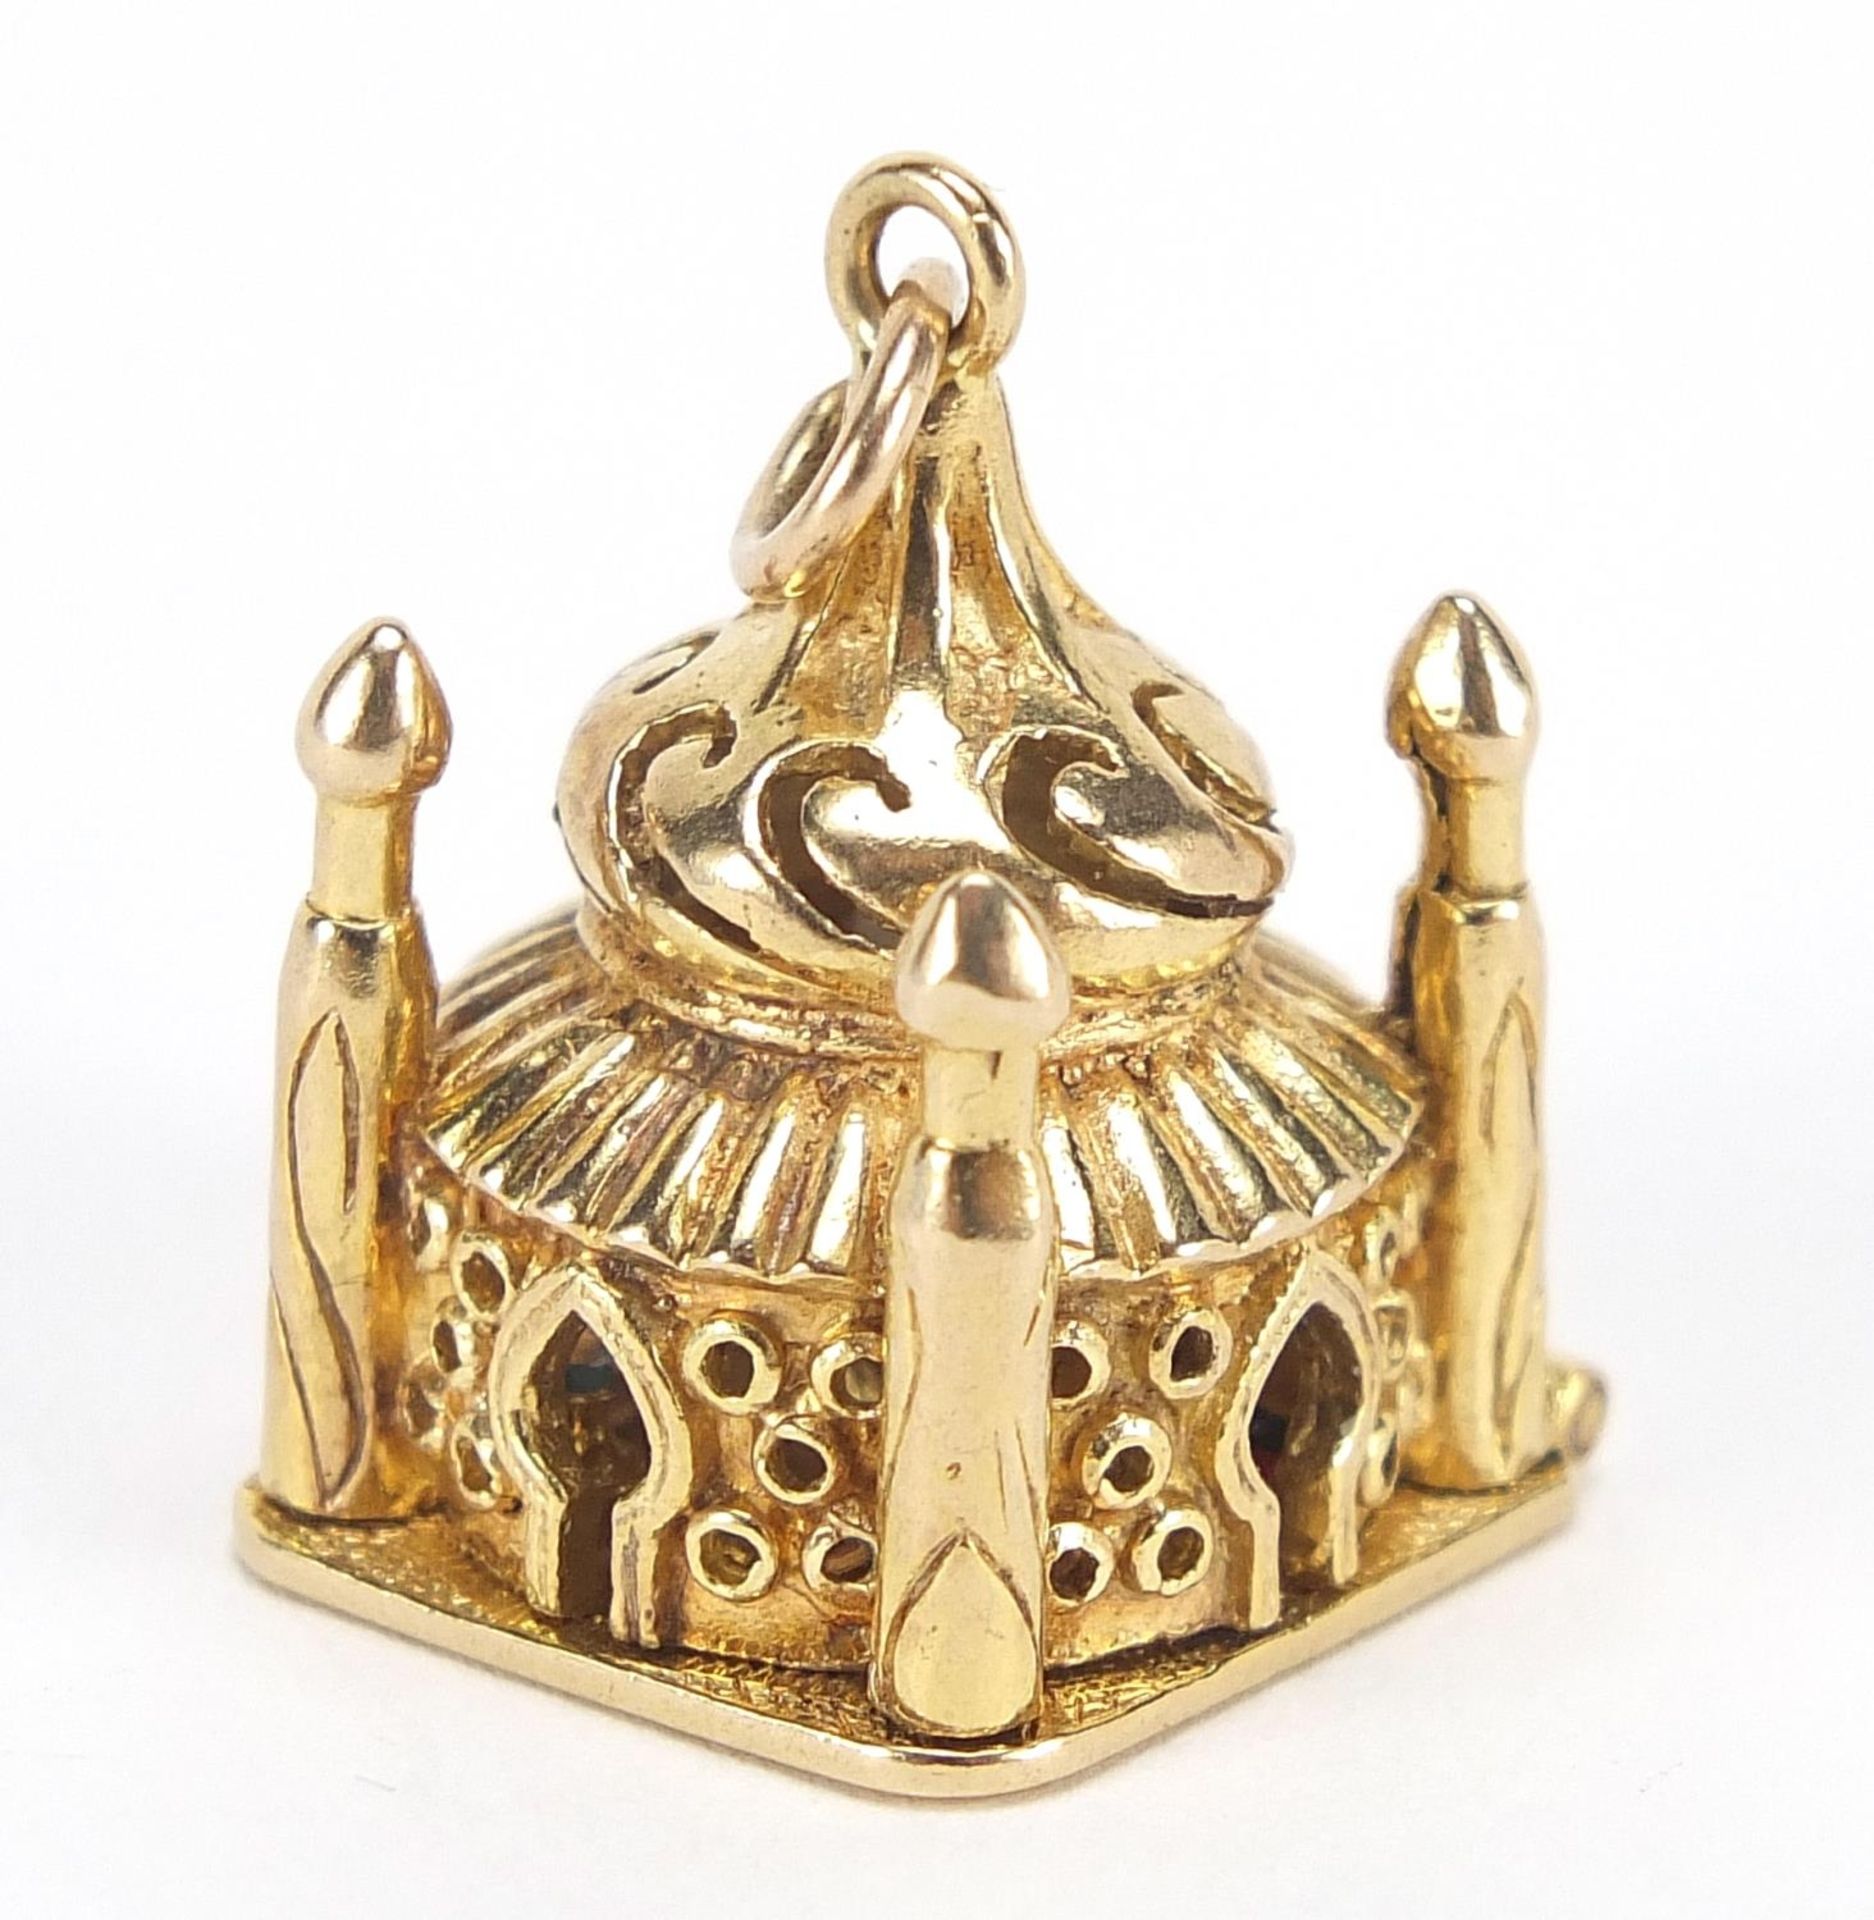 9ct gold and enamel Taj Mahal charm opening to reveal a praying figure, 2.2cm high, 10.2g : For - Image 2 of 7